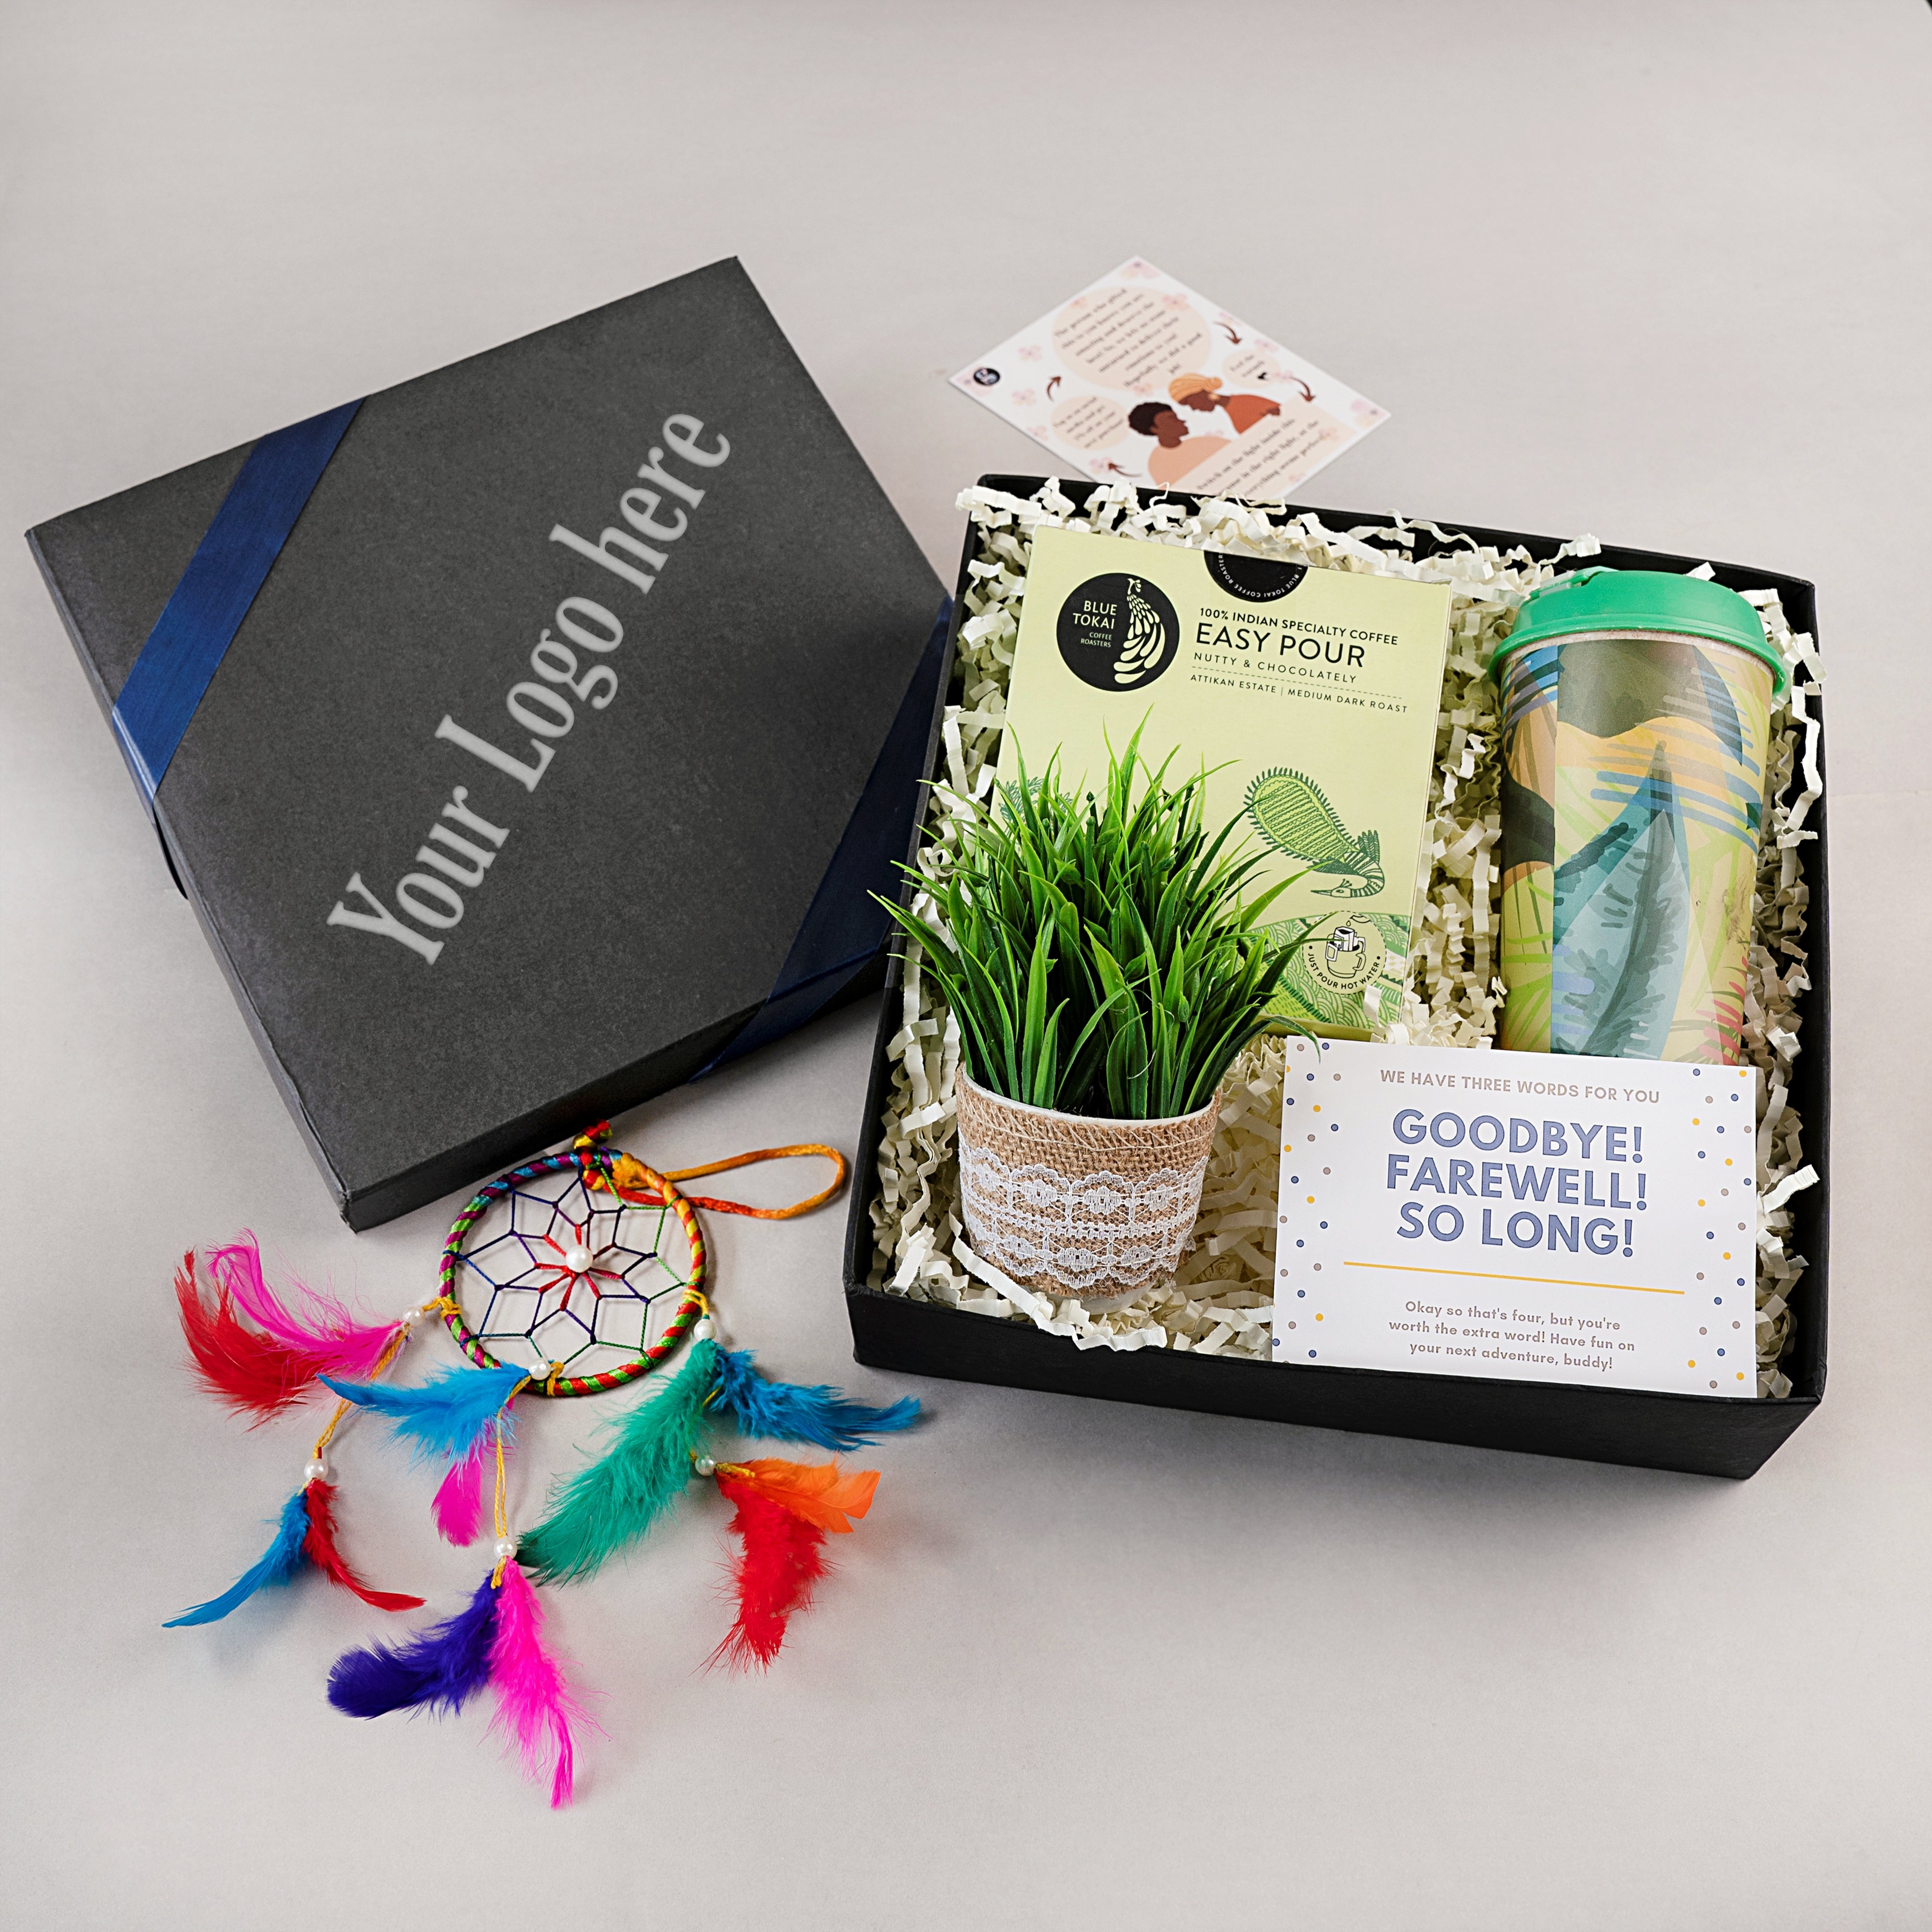 hr09 Employee Farewell Gifts Benefits Favours Retirement and Events | PDF |  Employment | Gratuity